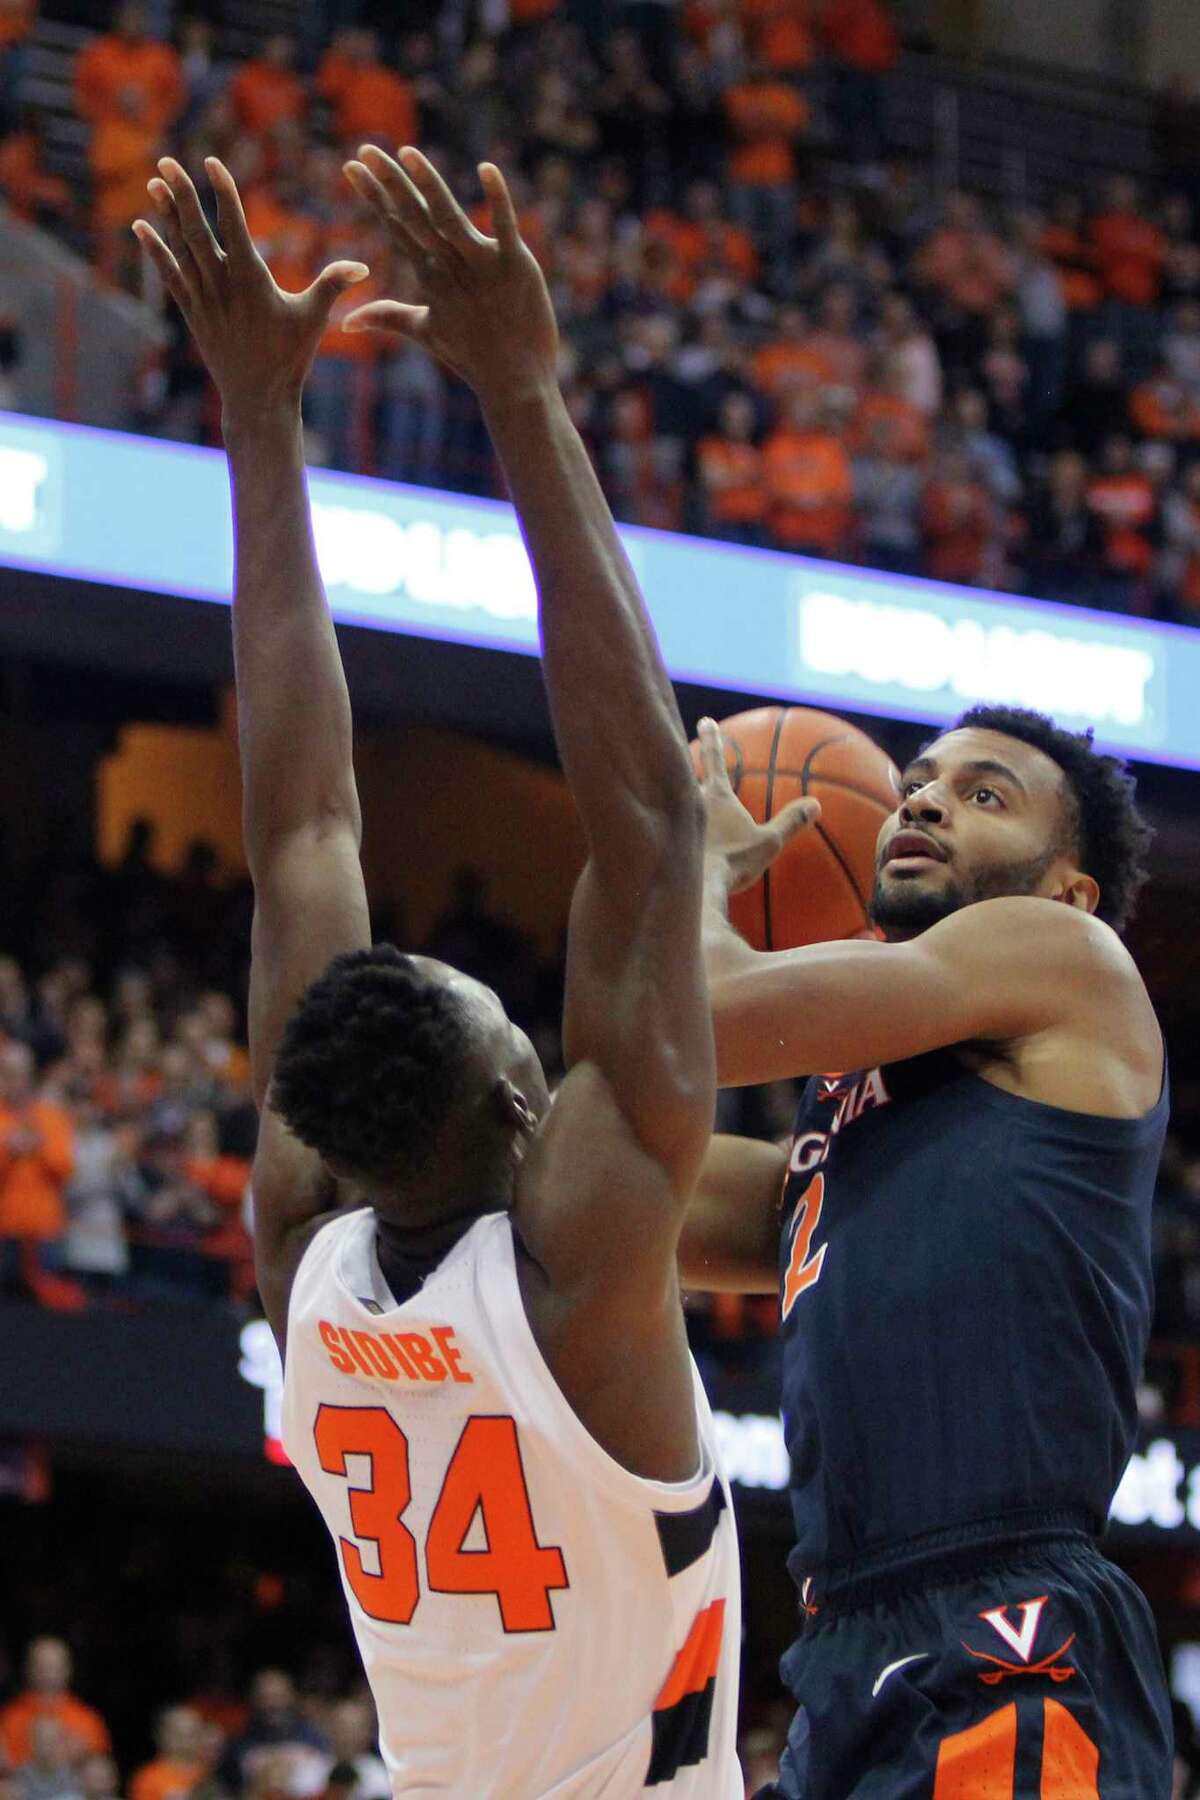 Virginia's Braxton Key, right, shoots over Syracuse's Bourama Sidibe, left, during the first half of an NCAA college basketball game in Syracuse, N.Y., Wednesday, Nov. 6, 2019. (AP Photo/Nick Lisi)